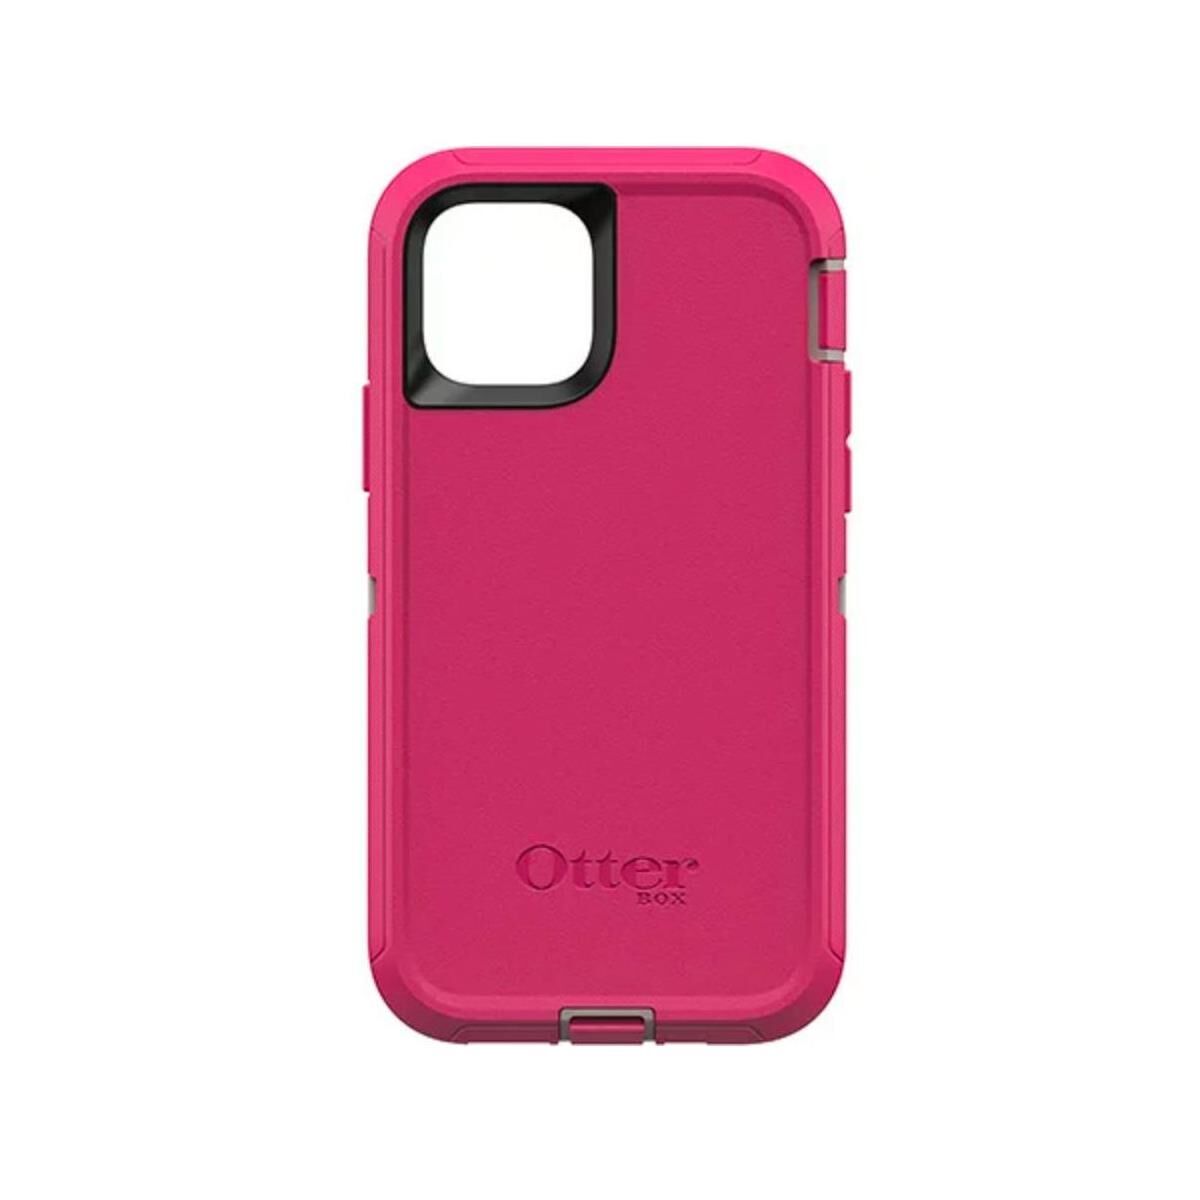 OtterBox Defender Screenless Edition Case for iPhone 11 Pro, Lovebug Pink